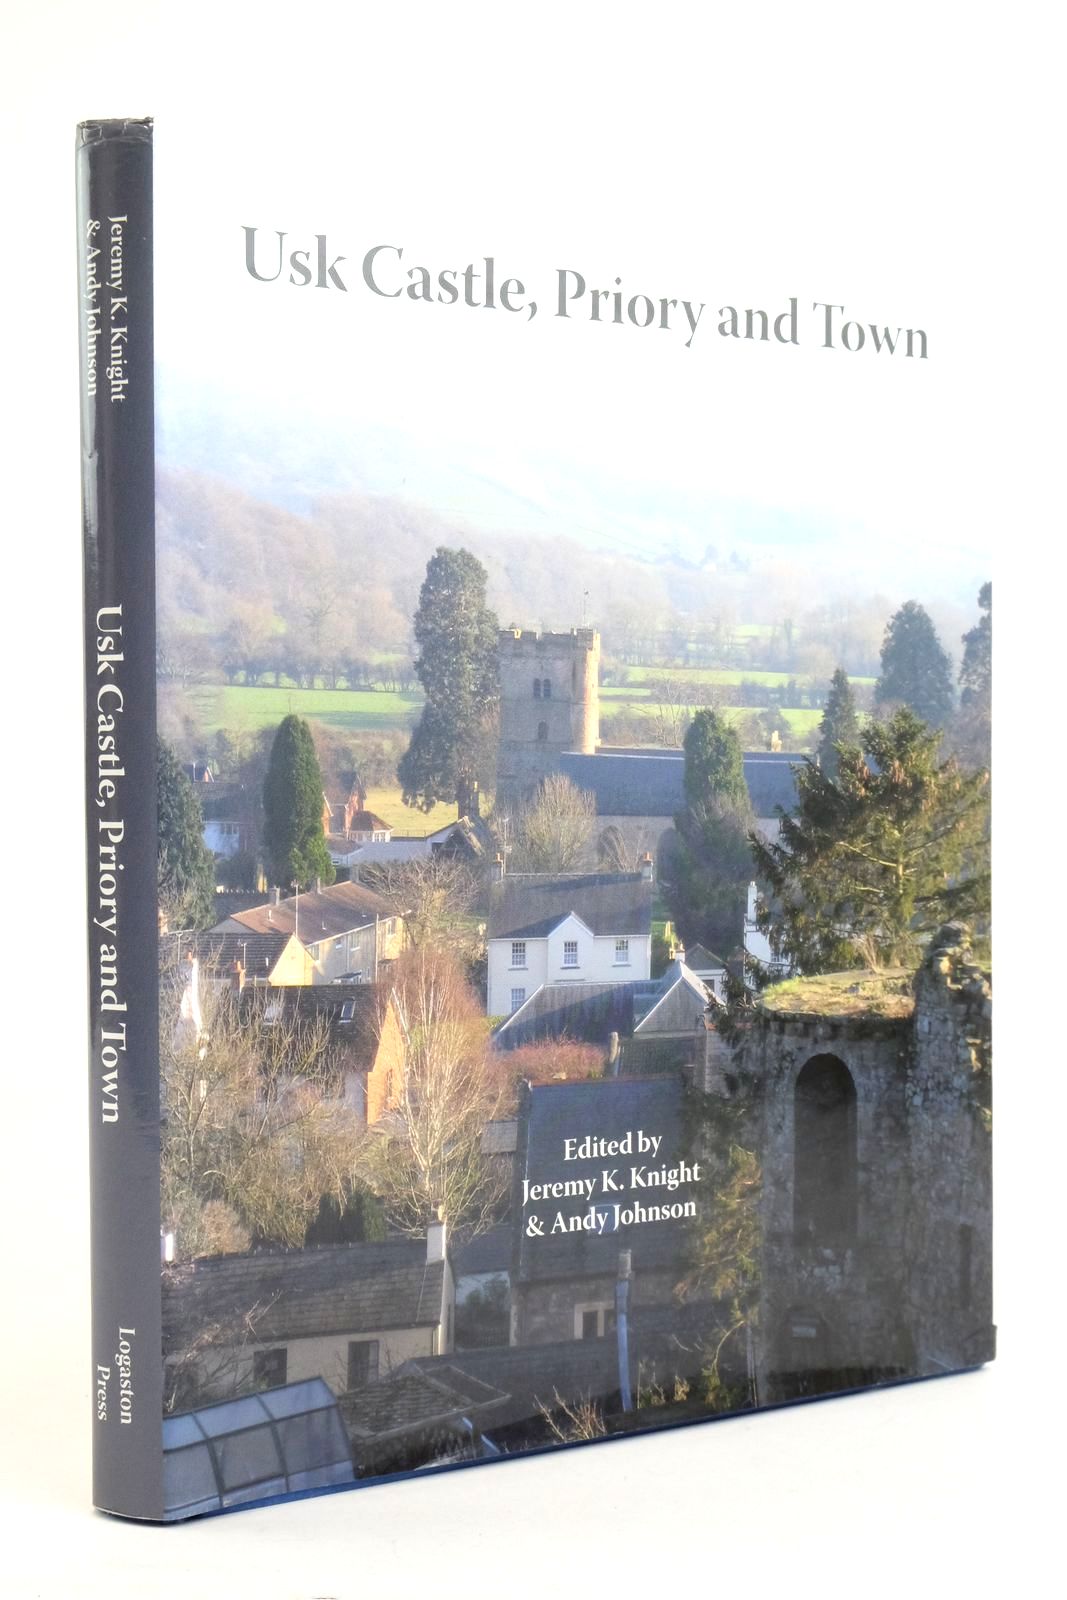 Photo of USK CASTLE, PRIORY AND TOWN written by Knight, Jeremy Johnson, Andy published by Logaston Press (STOCK CODE: 2135989)  for sale by Stella & Rose's Books